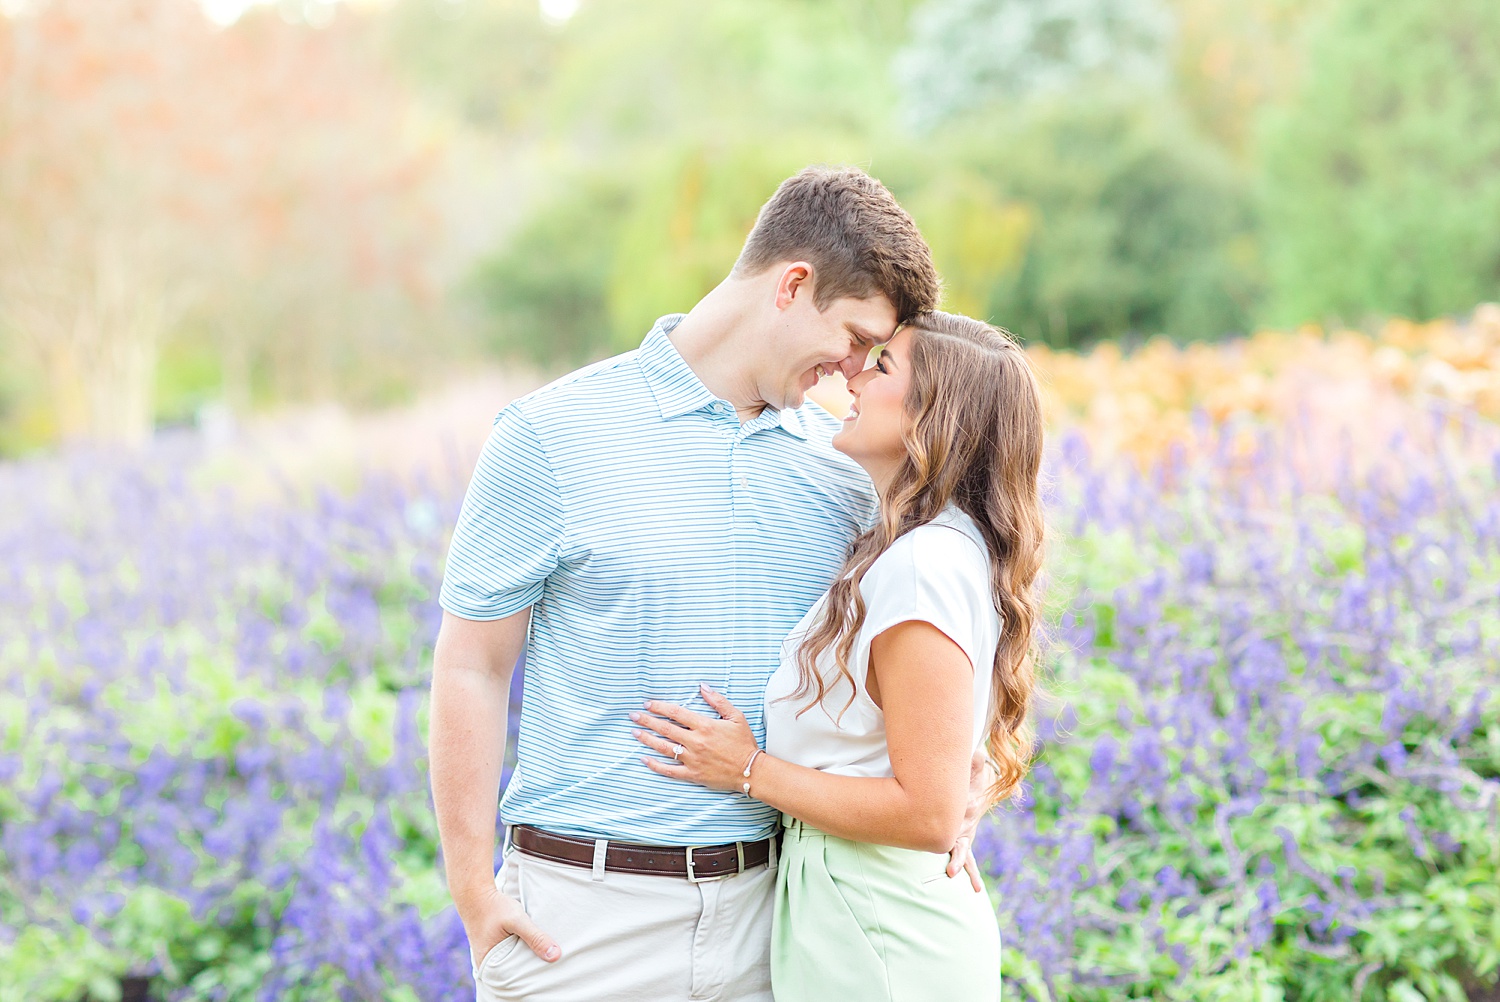 couple engagement portraits in field of purple flowers